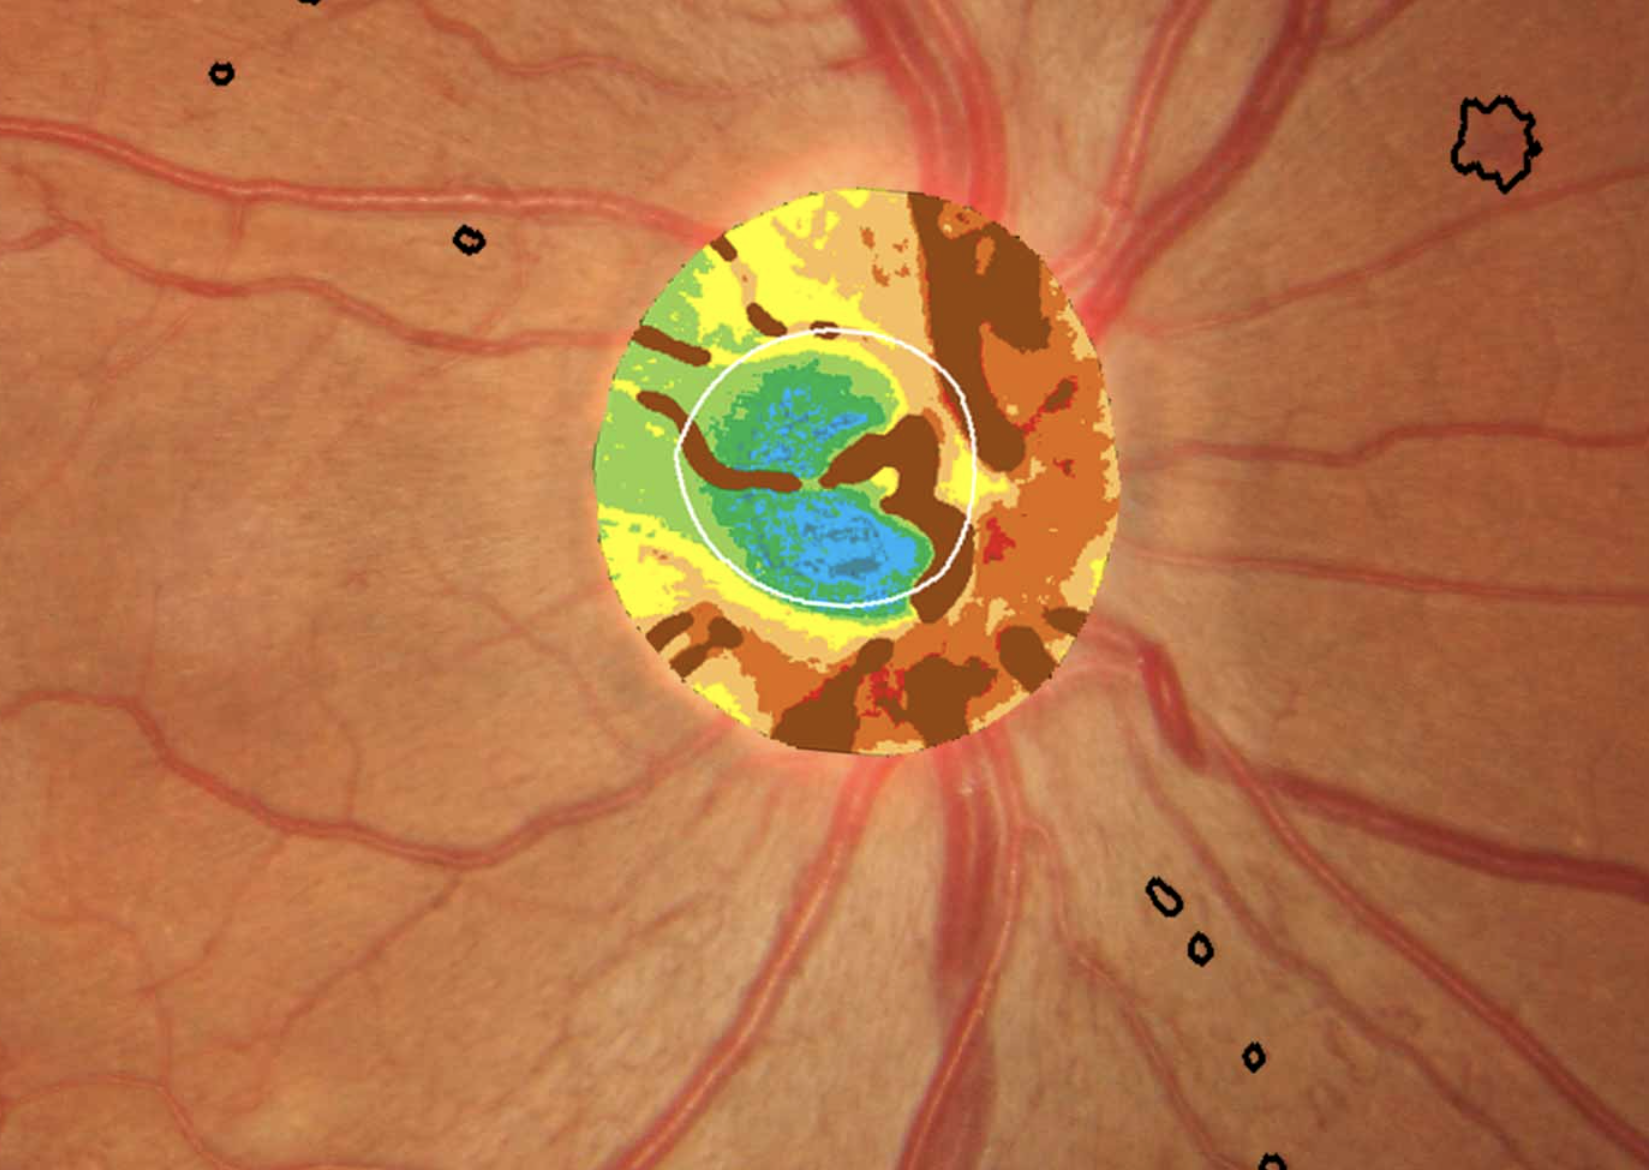 Measuring the hemoglobin concentration in the optic nerve head may aid in glaucoma diagnosis.